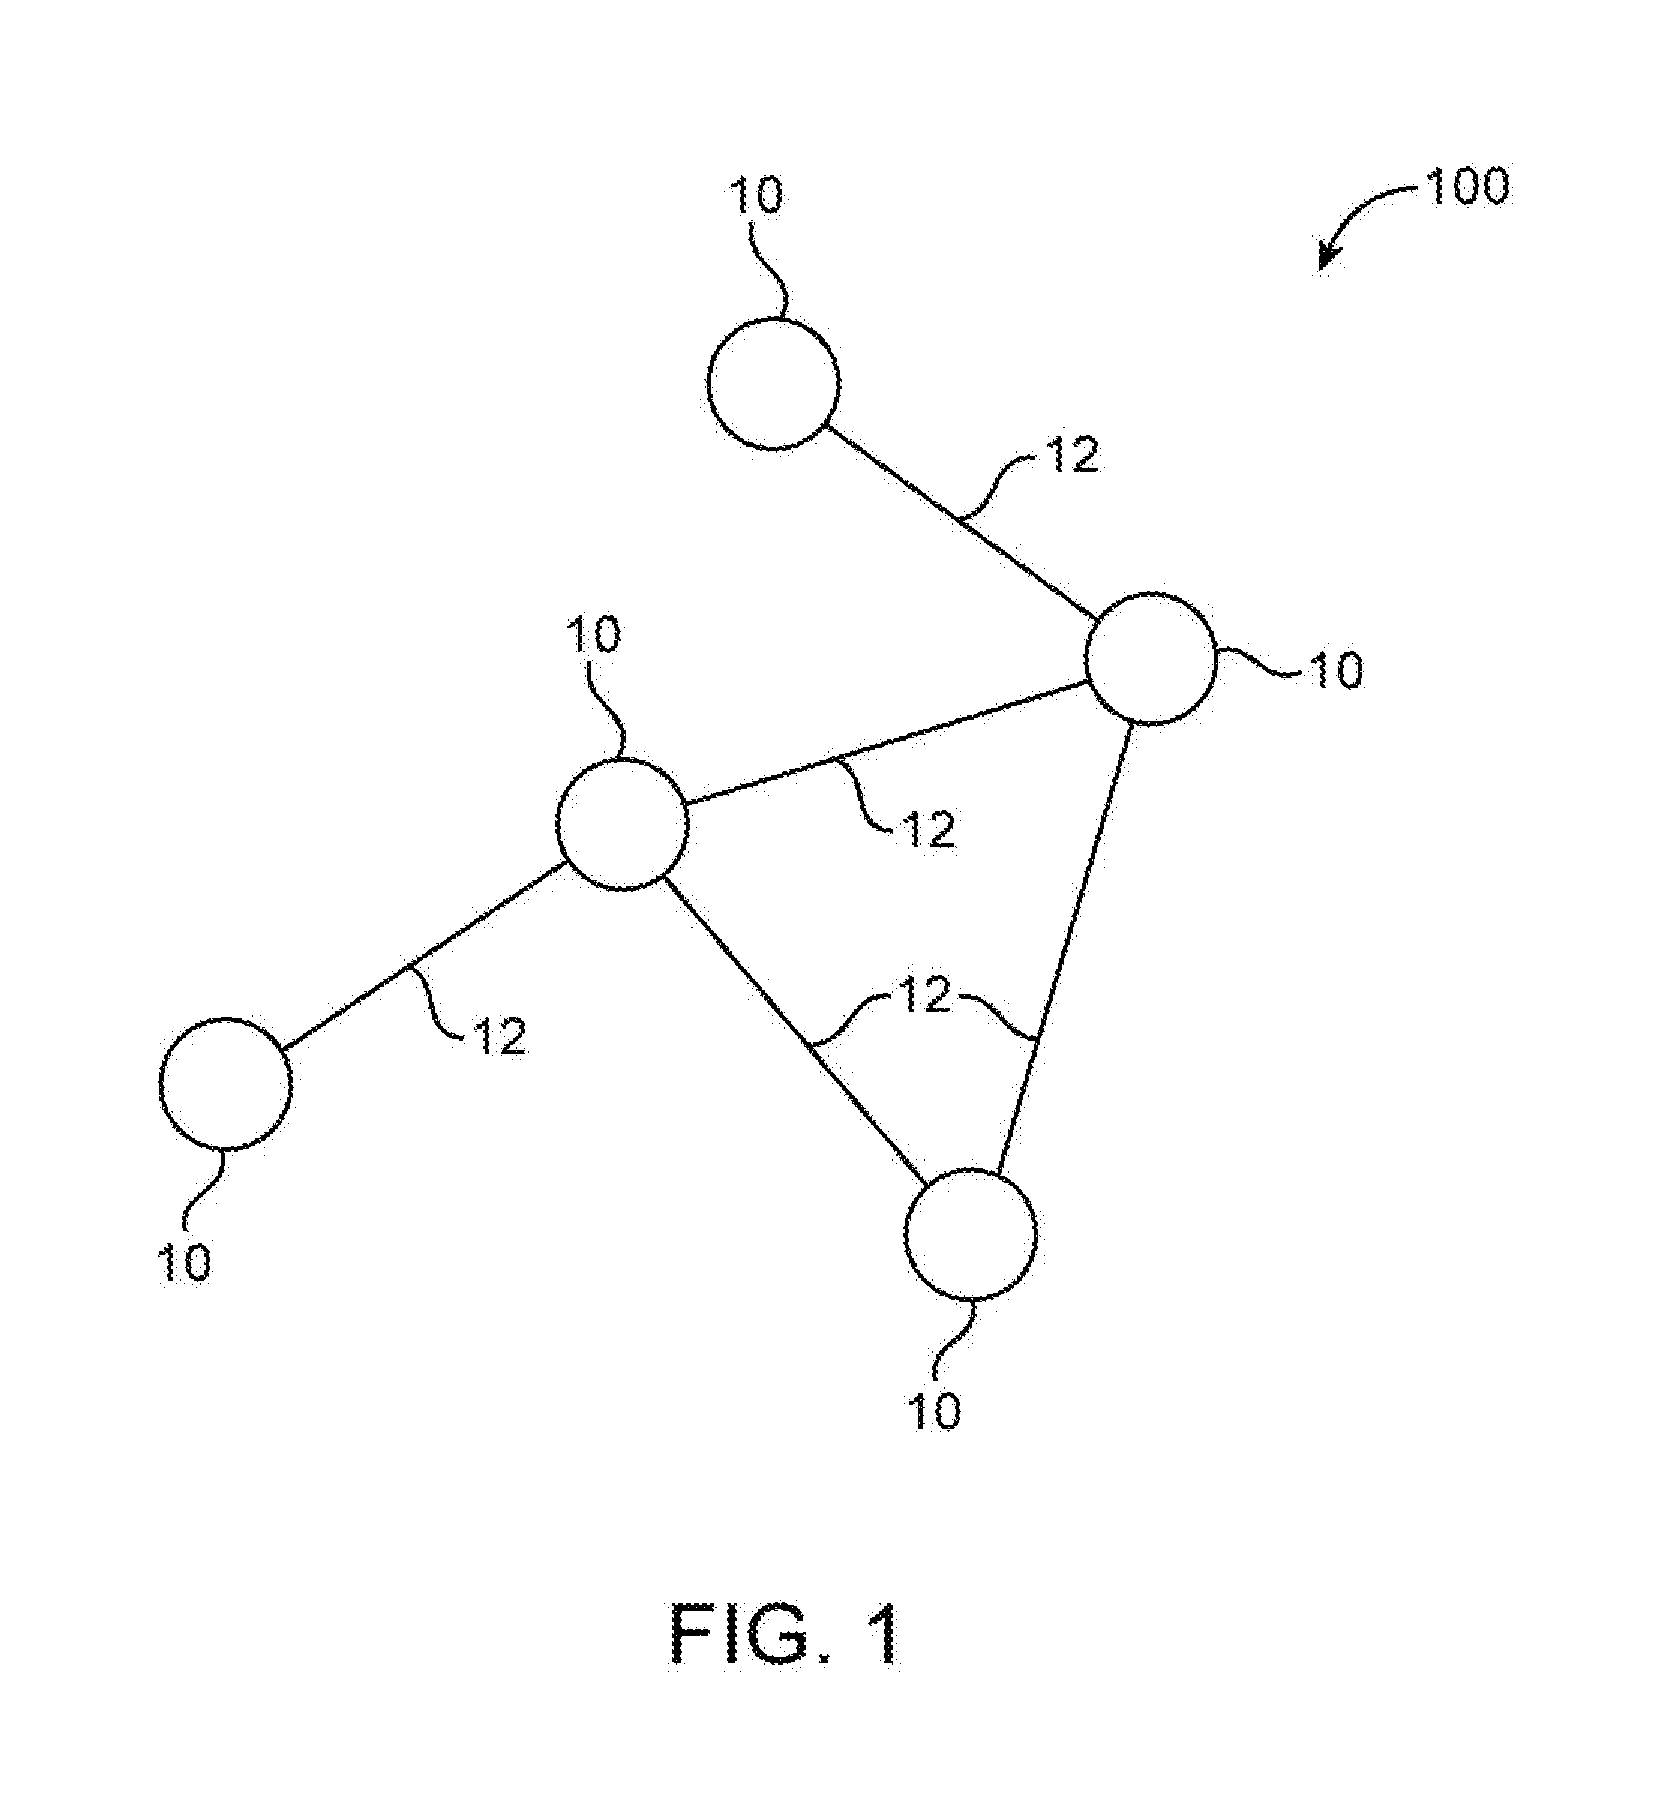 Digital currency mining circuitry having shared processing logic